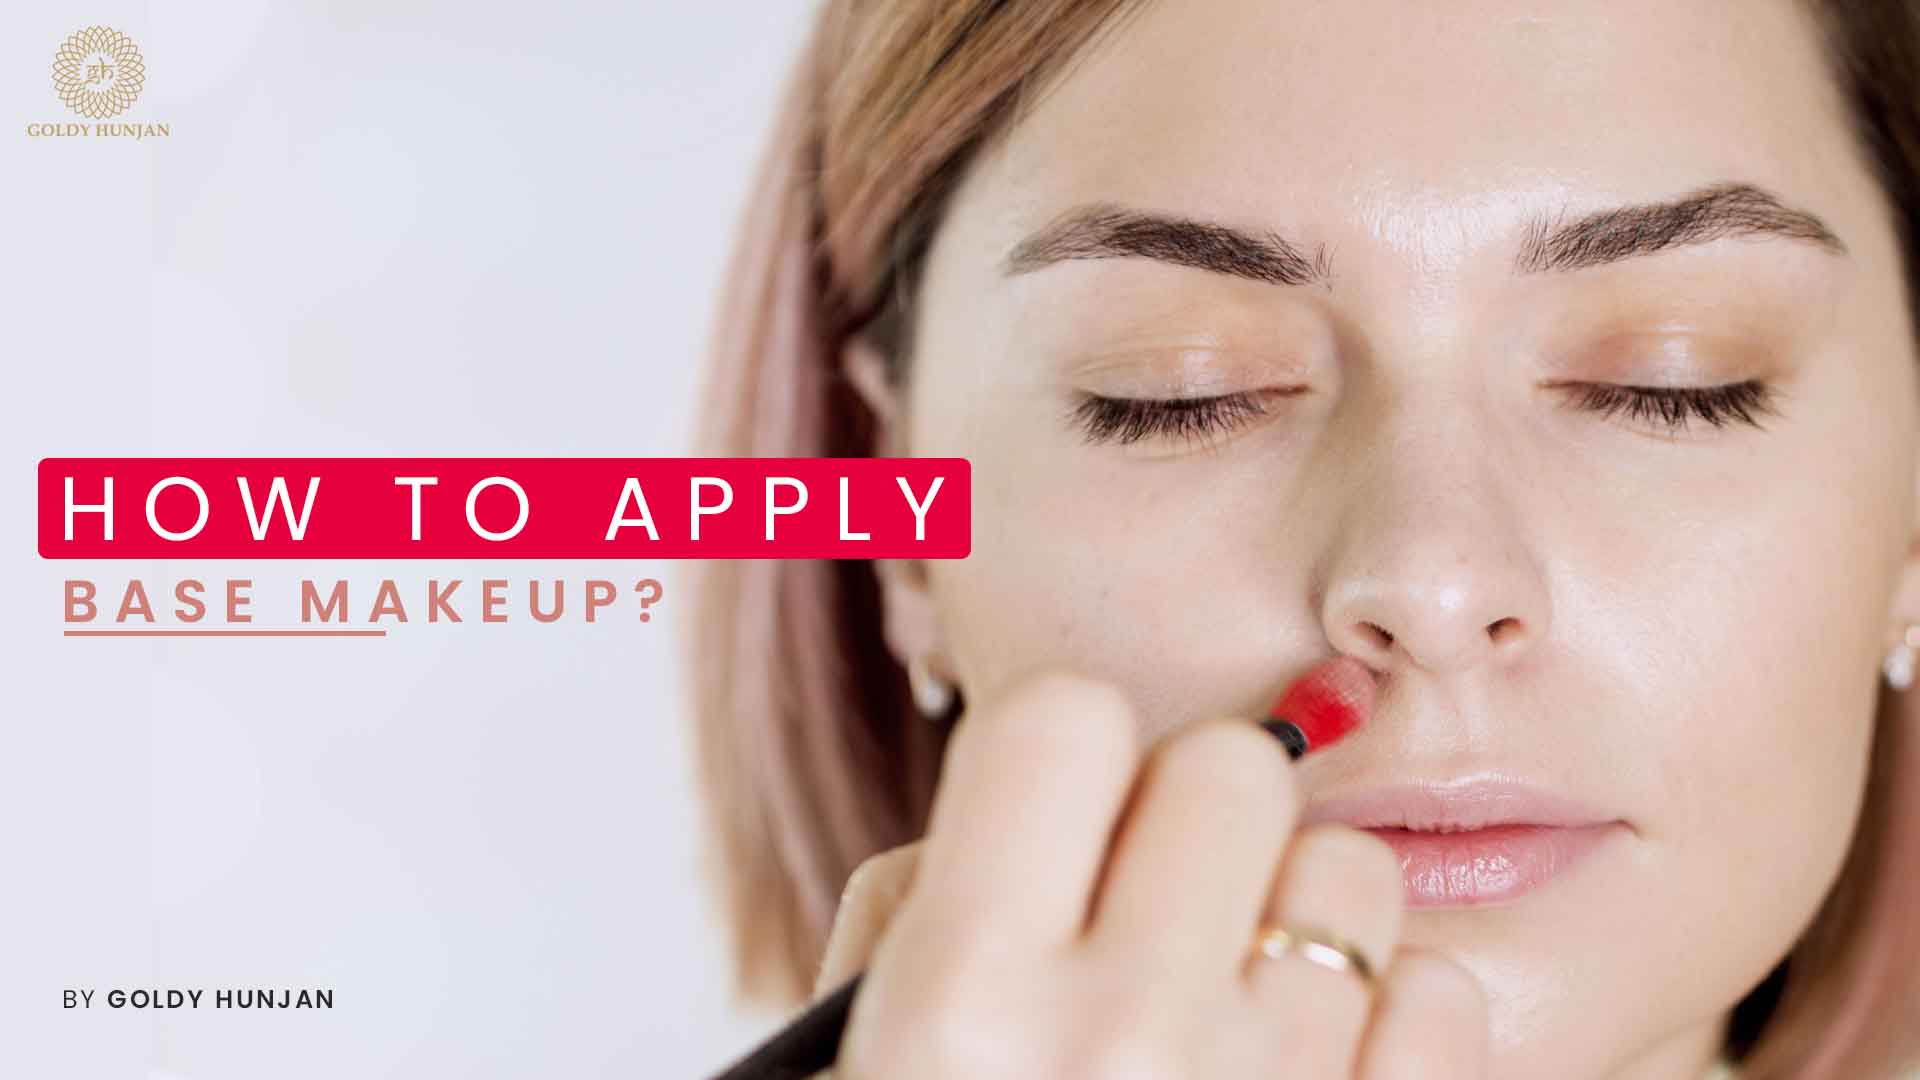 How to apply base makeup